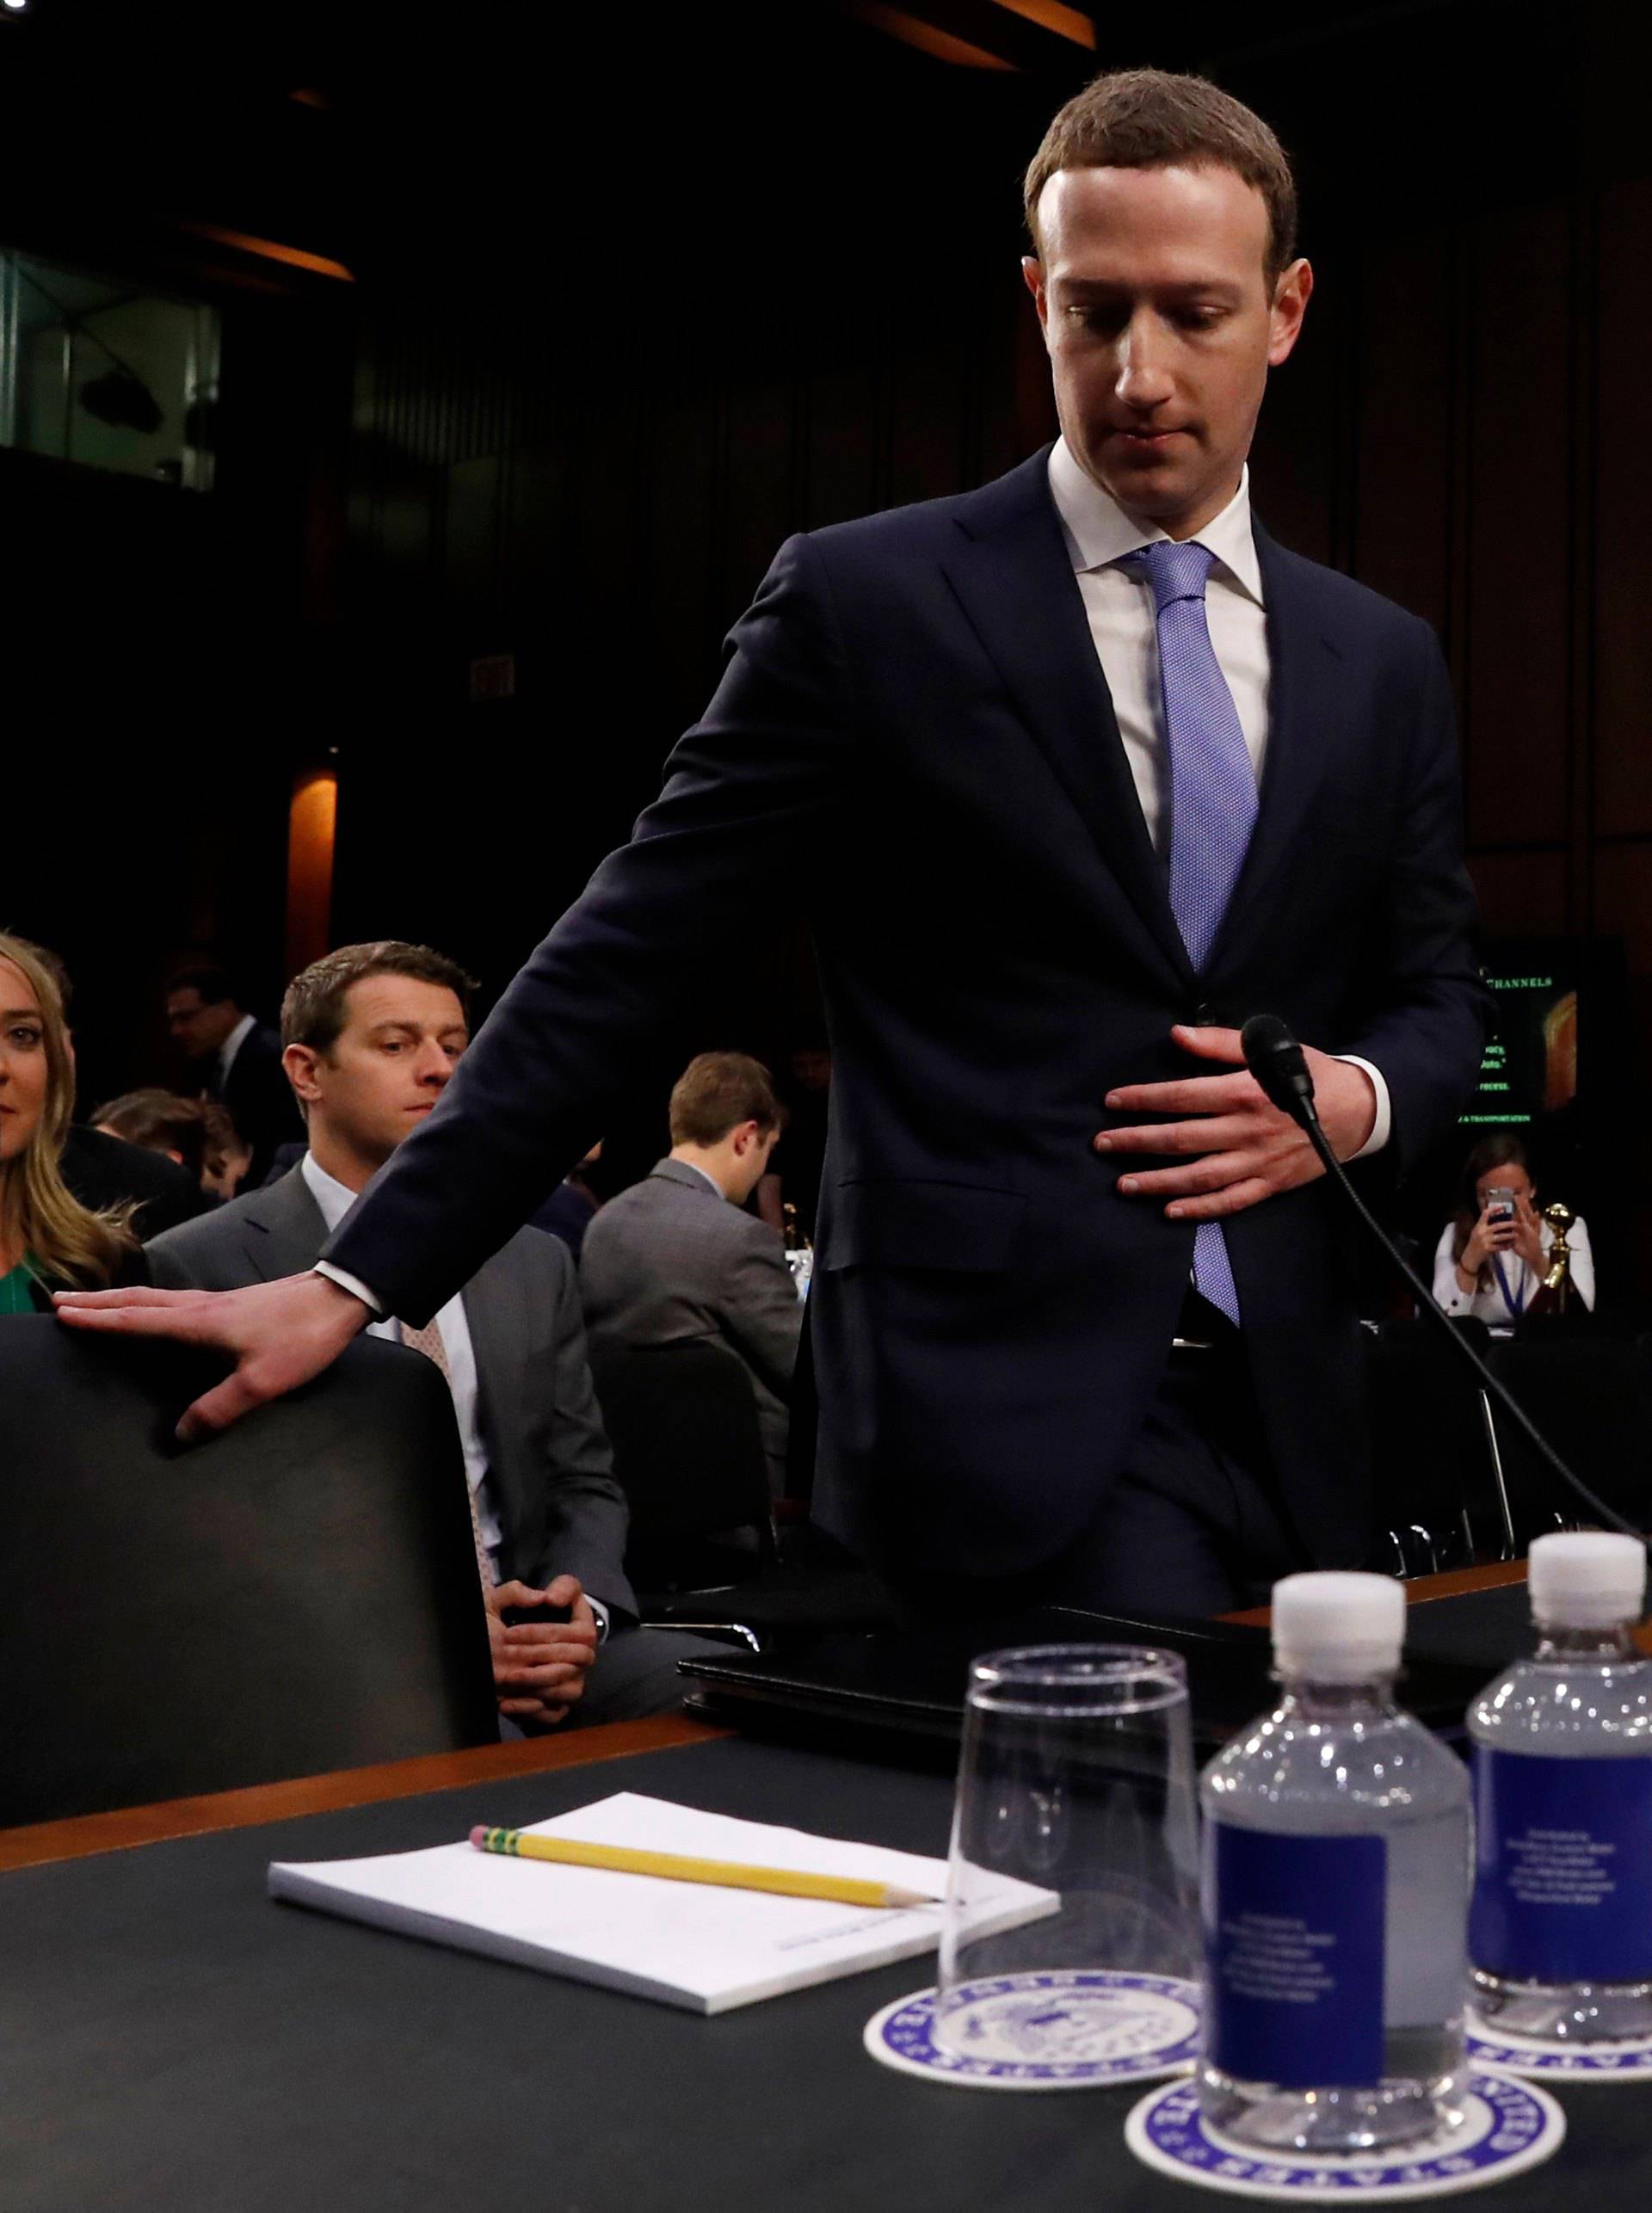 Facebook CEO Zuckerberg continues to testify before a U.S. Senate joint hearing on Capitol Hill in Washington